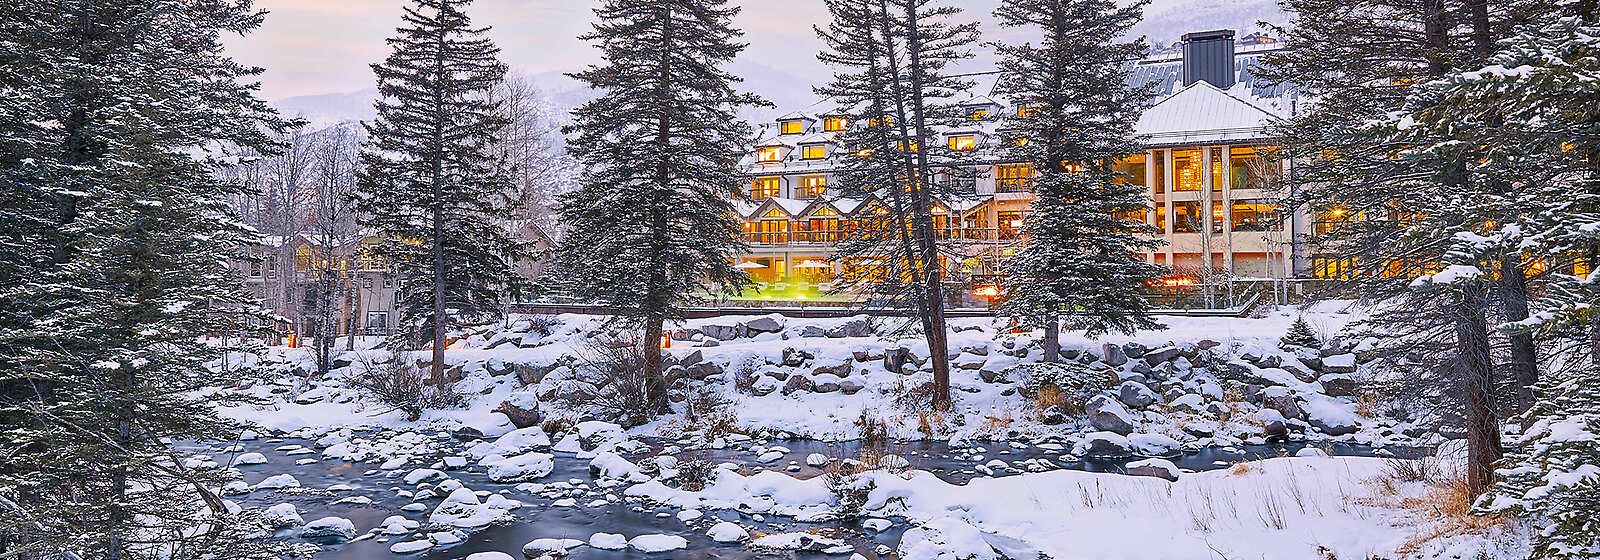 Hotel Talisa, A Luxury Collection Resort, Vail